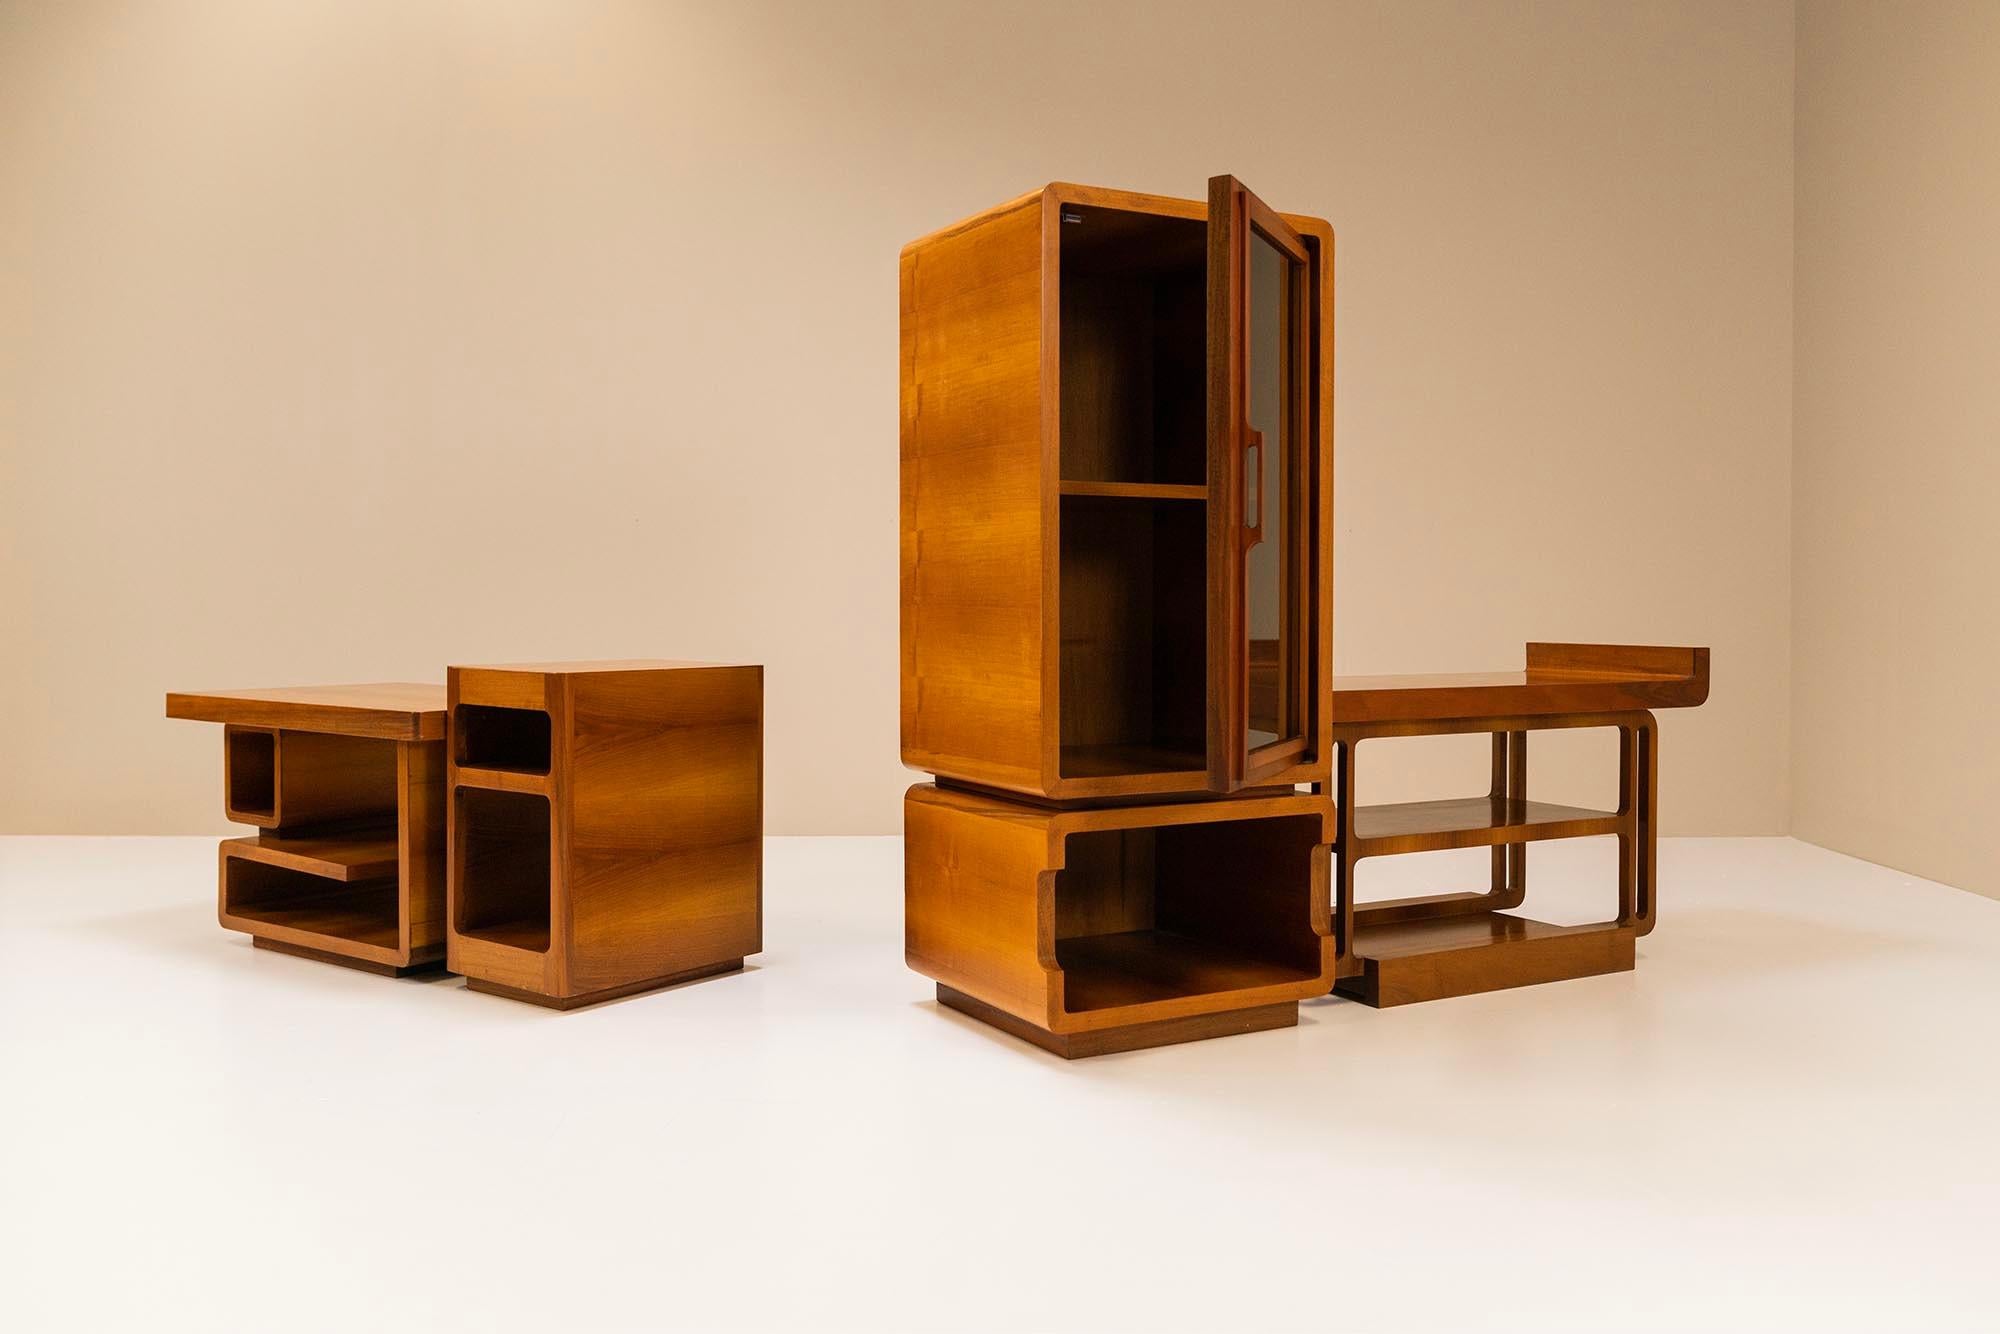 Modernist Showcase Cabinet and Coffee Table in Walnut, Italy, 1960s For Sale 2